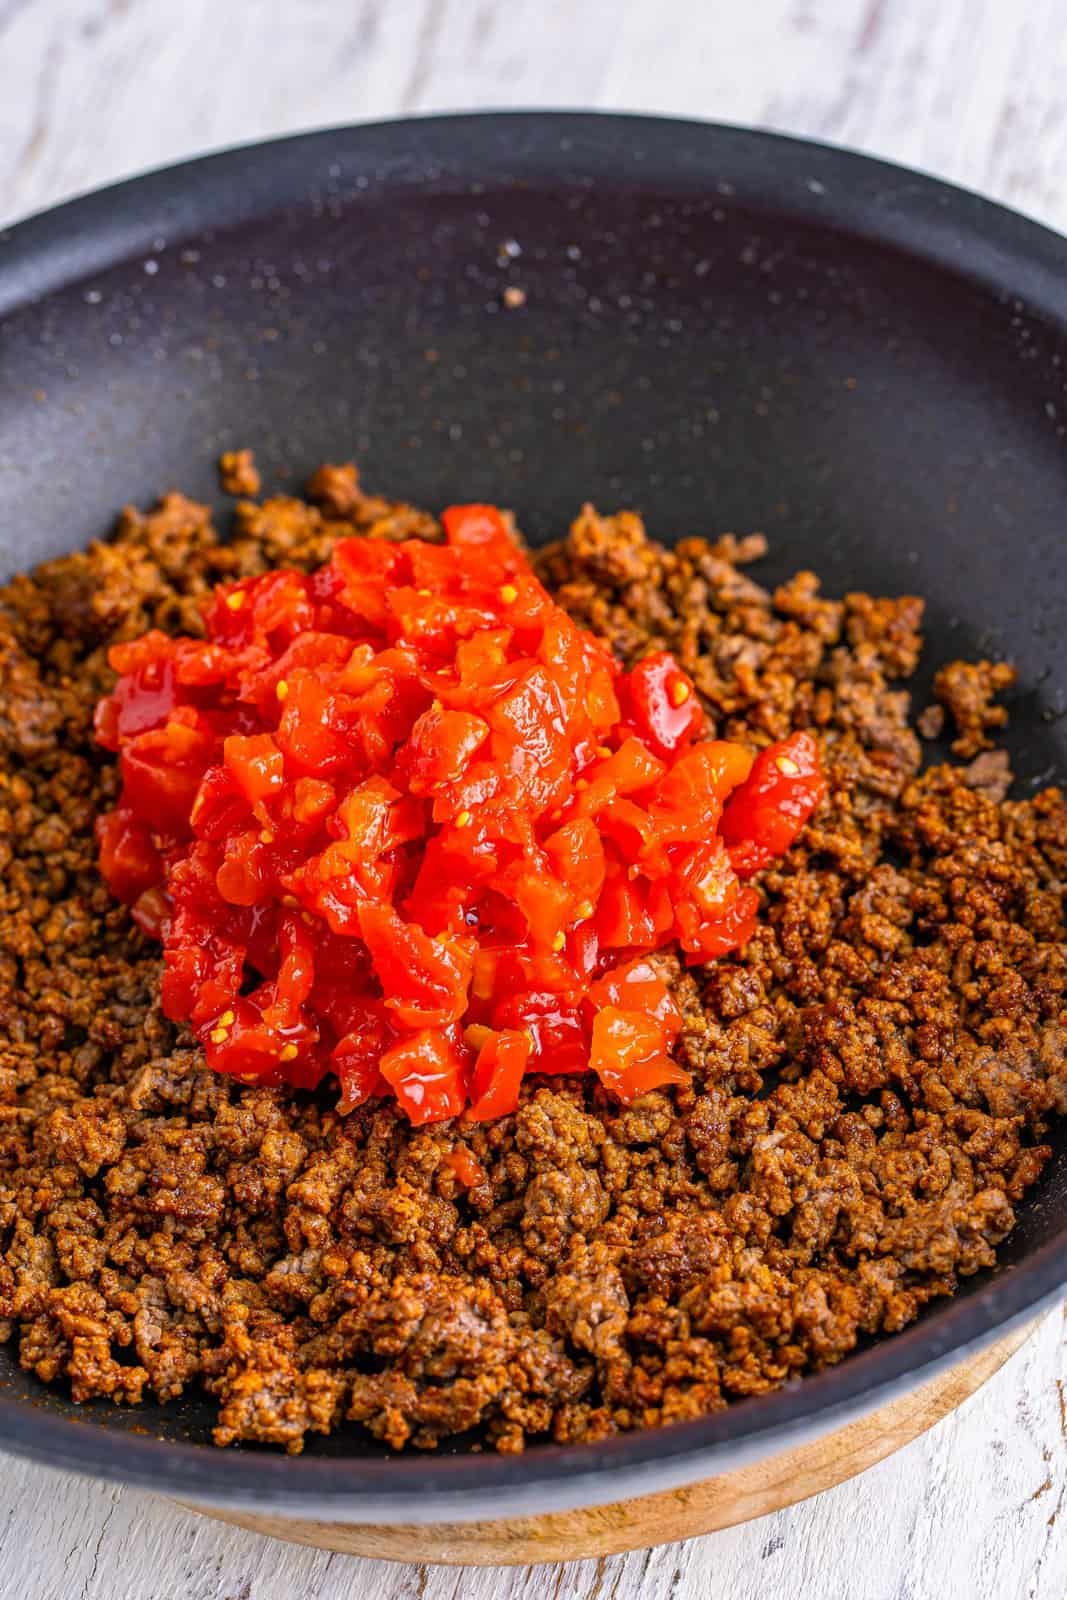 Rotel on top of cooked ground beef.